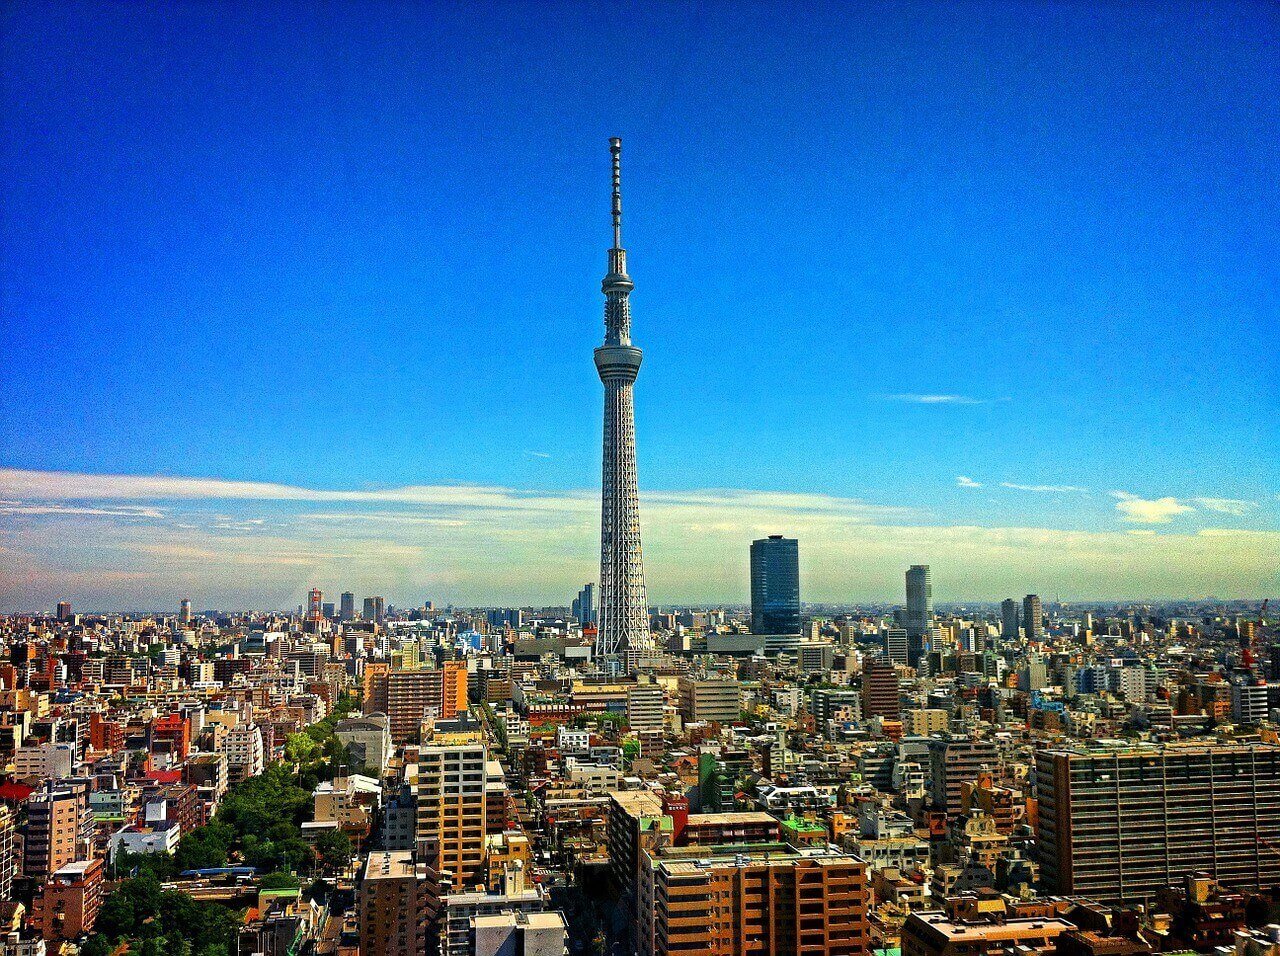 Tokyo – Coolest Place to Stay in Japan